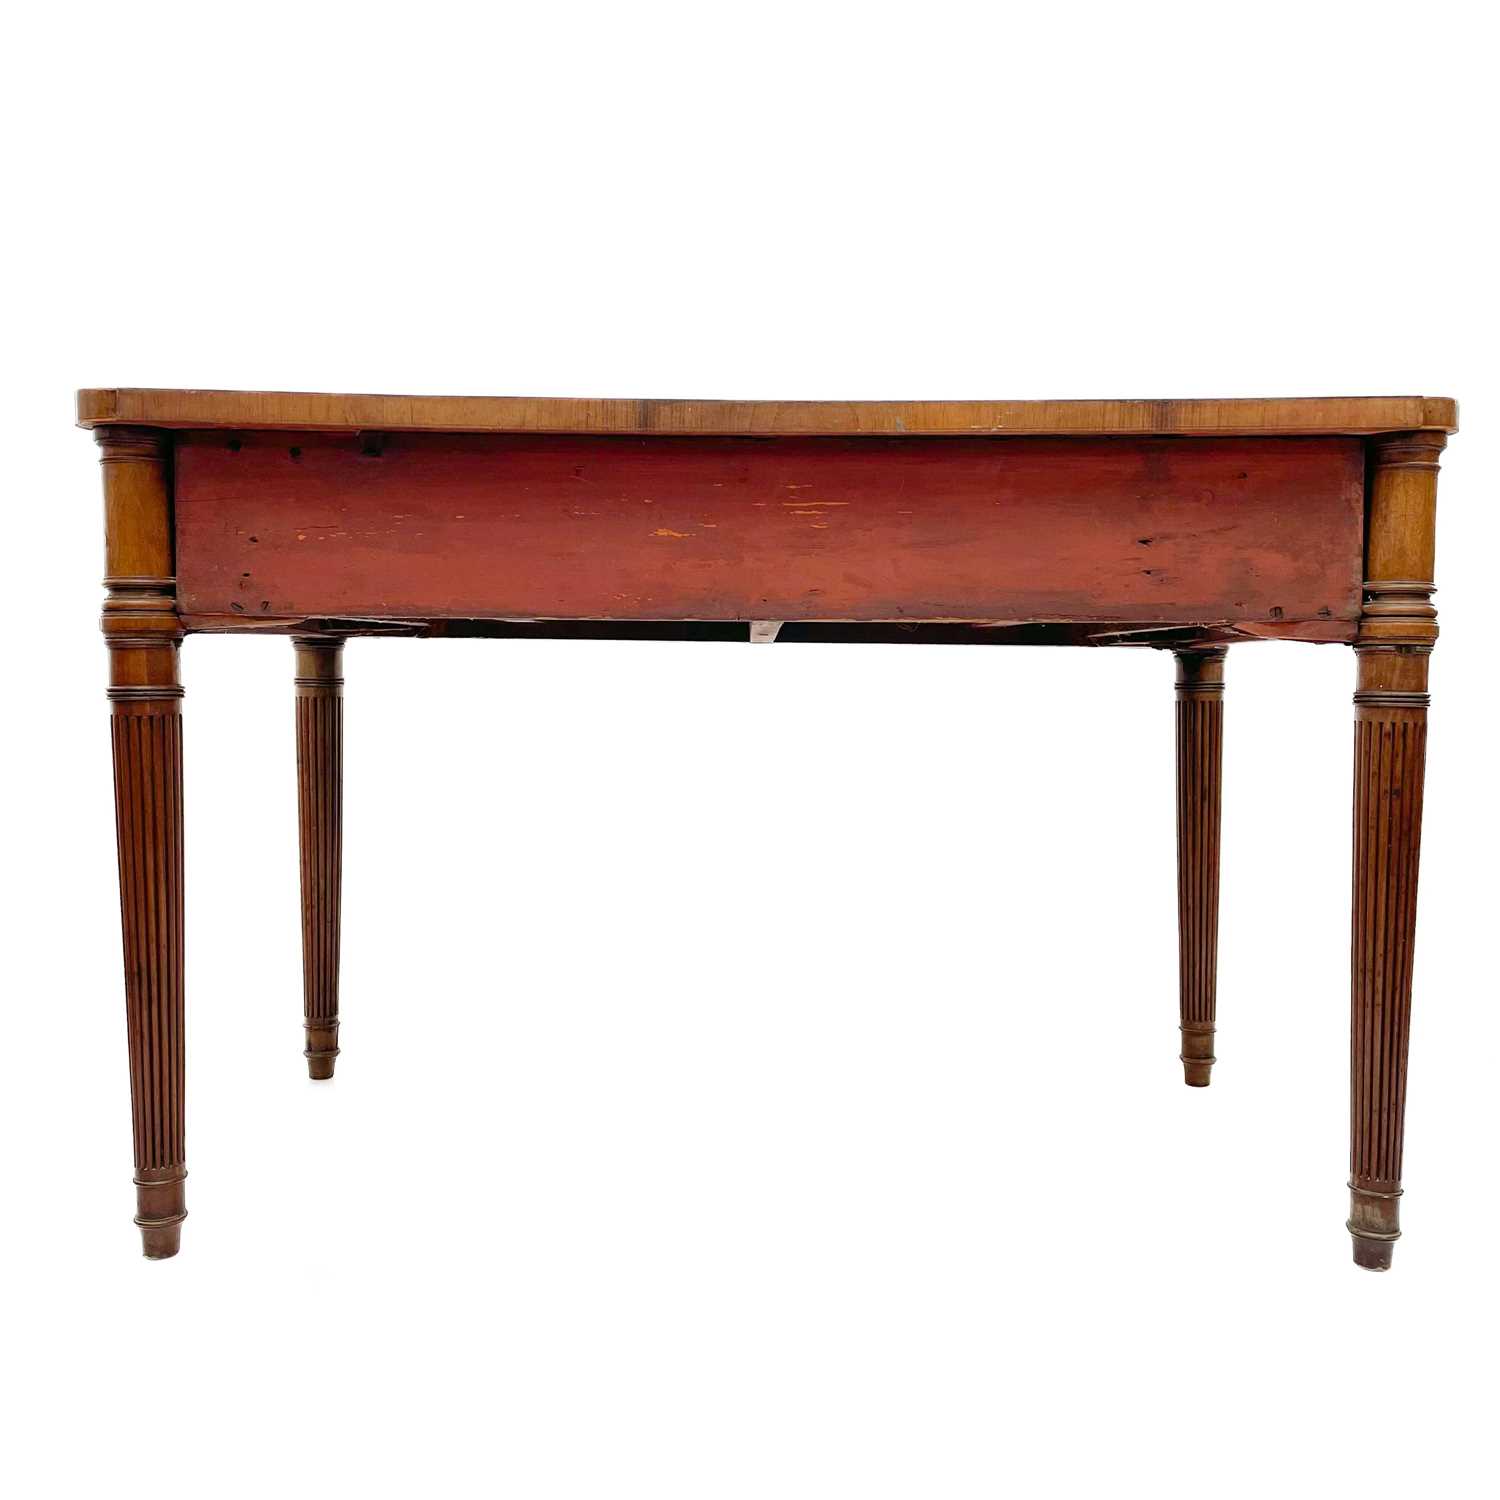 A George III mahogany and inlaid side table, possibly Irish. - Image 6 of 9